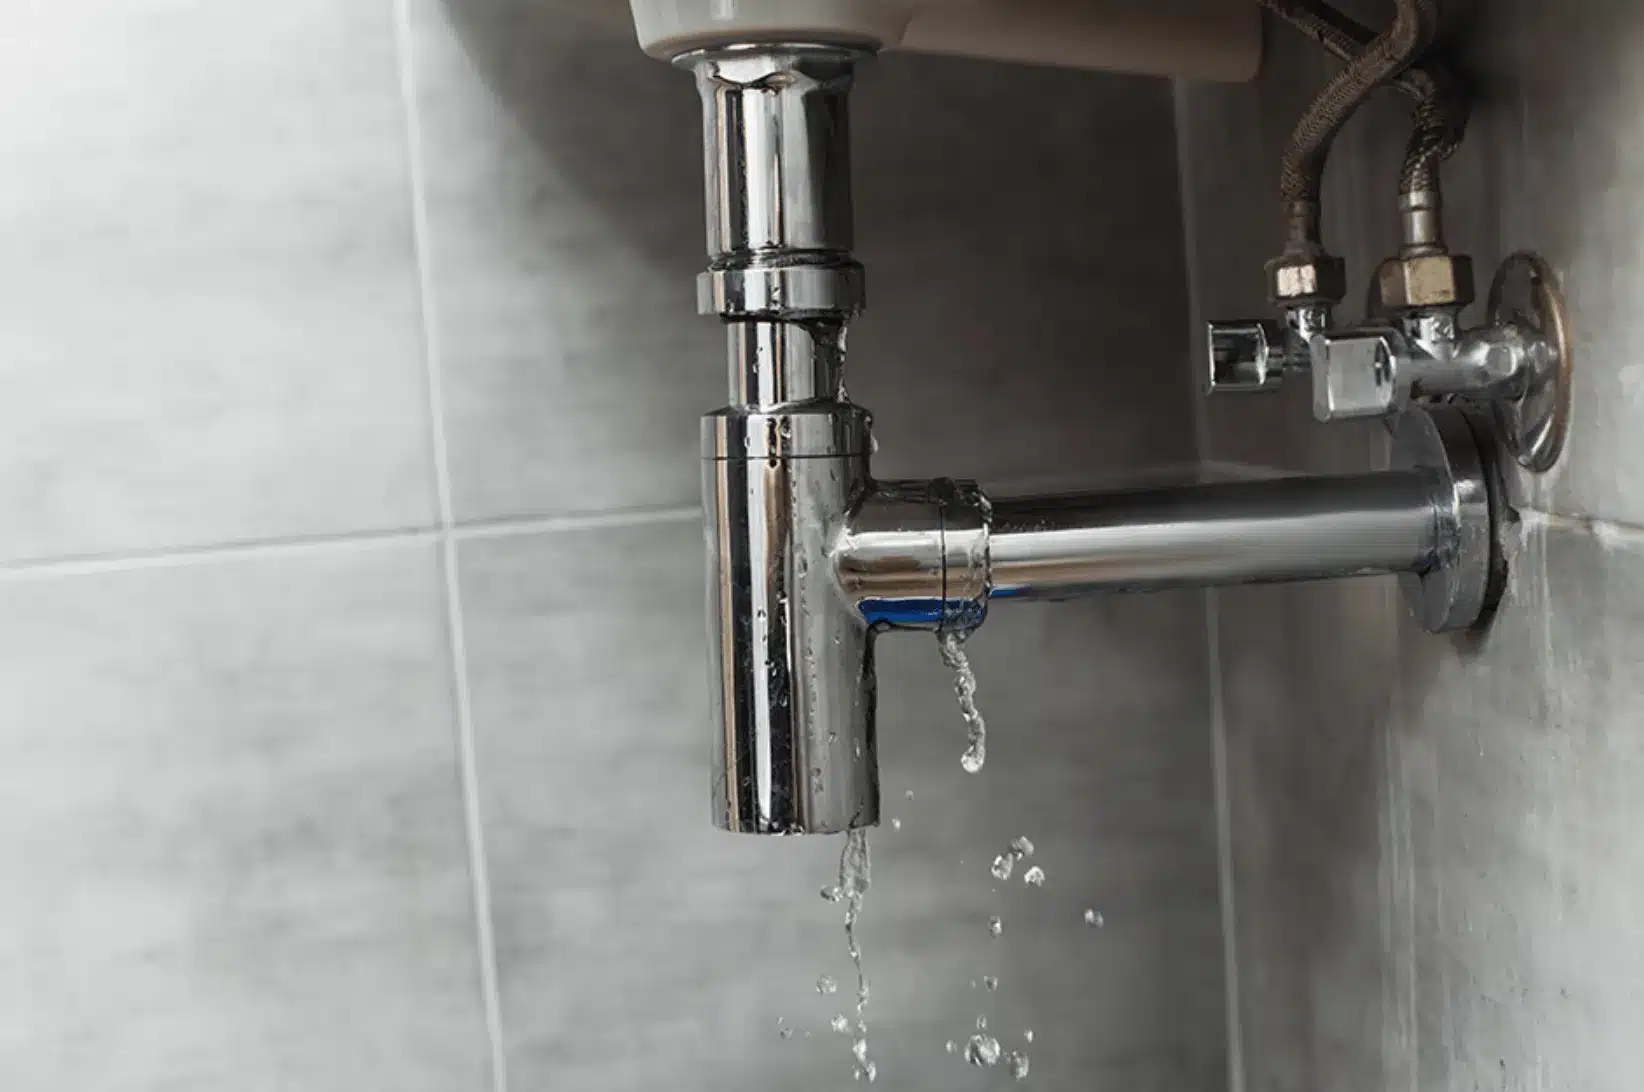 Leak Detection Services in Austin, TX - Plumbing Outfitters